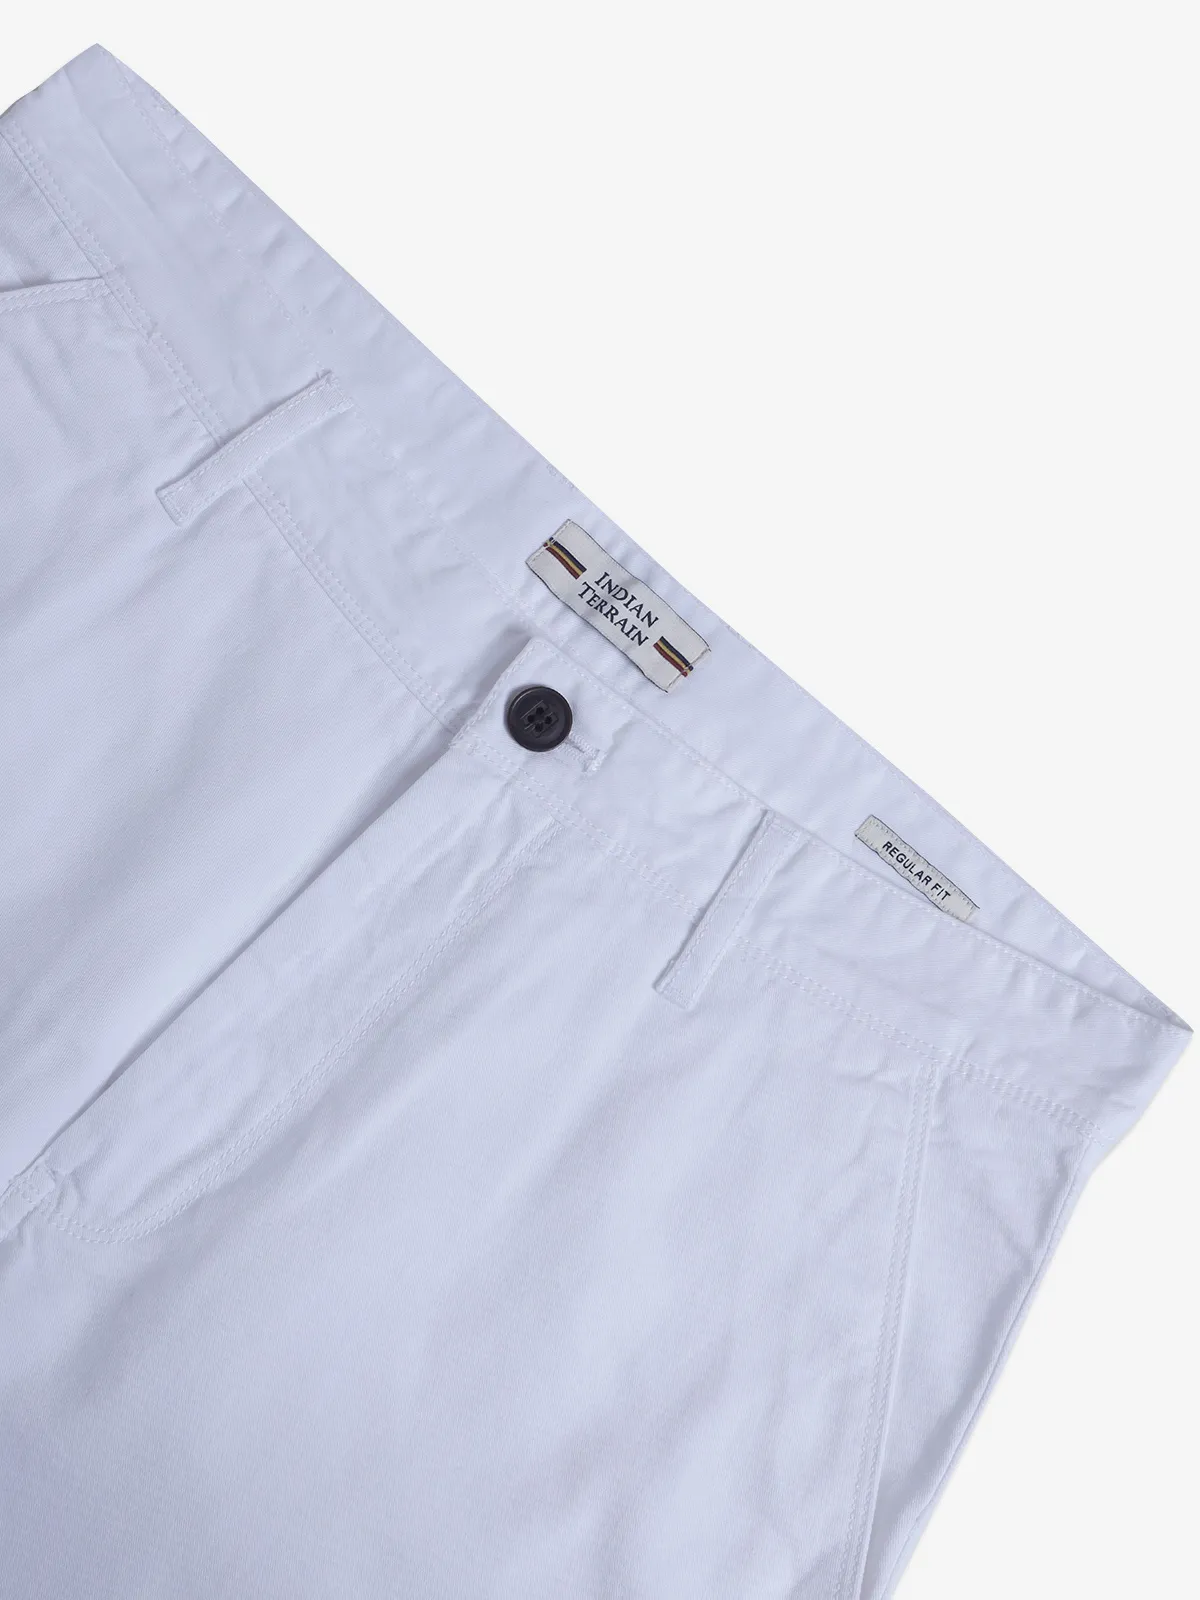 INDIAN TERRAIN white solid regular fit shorts